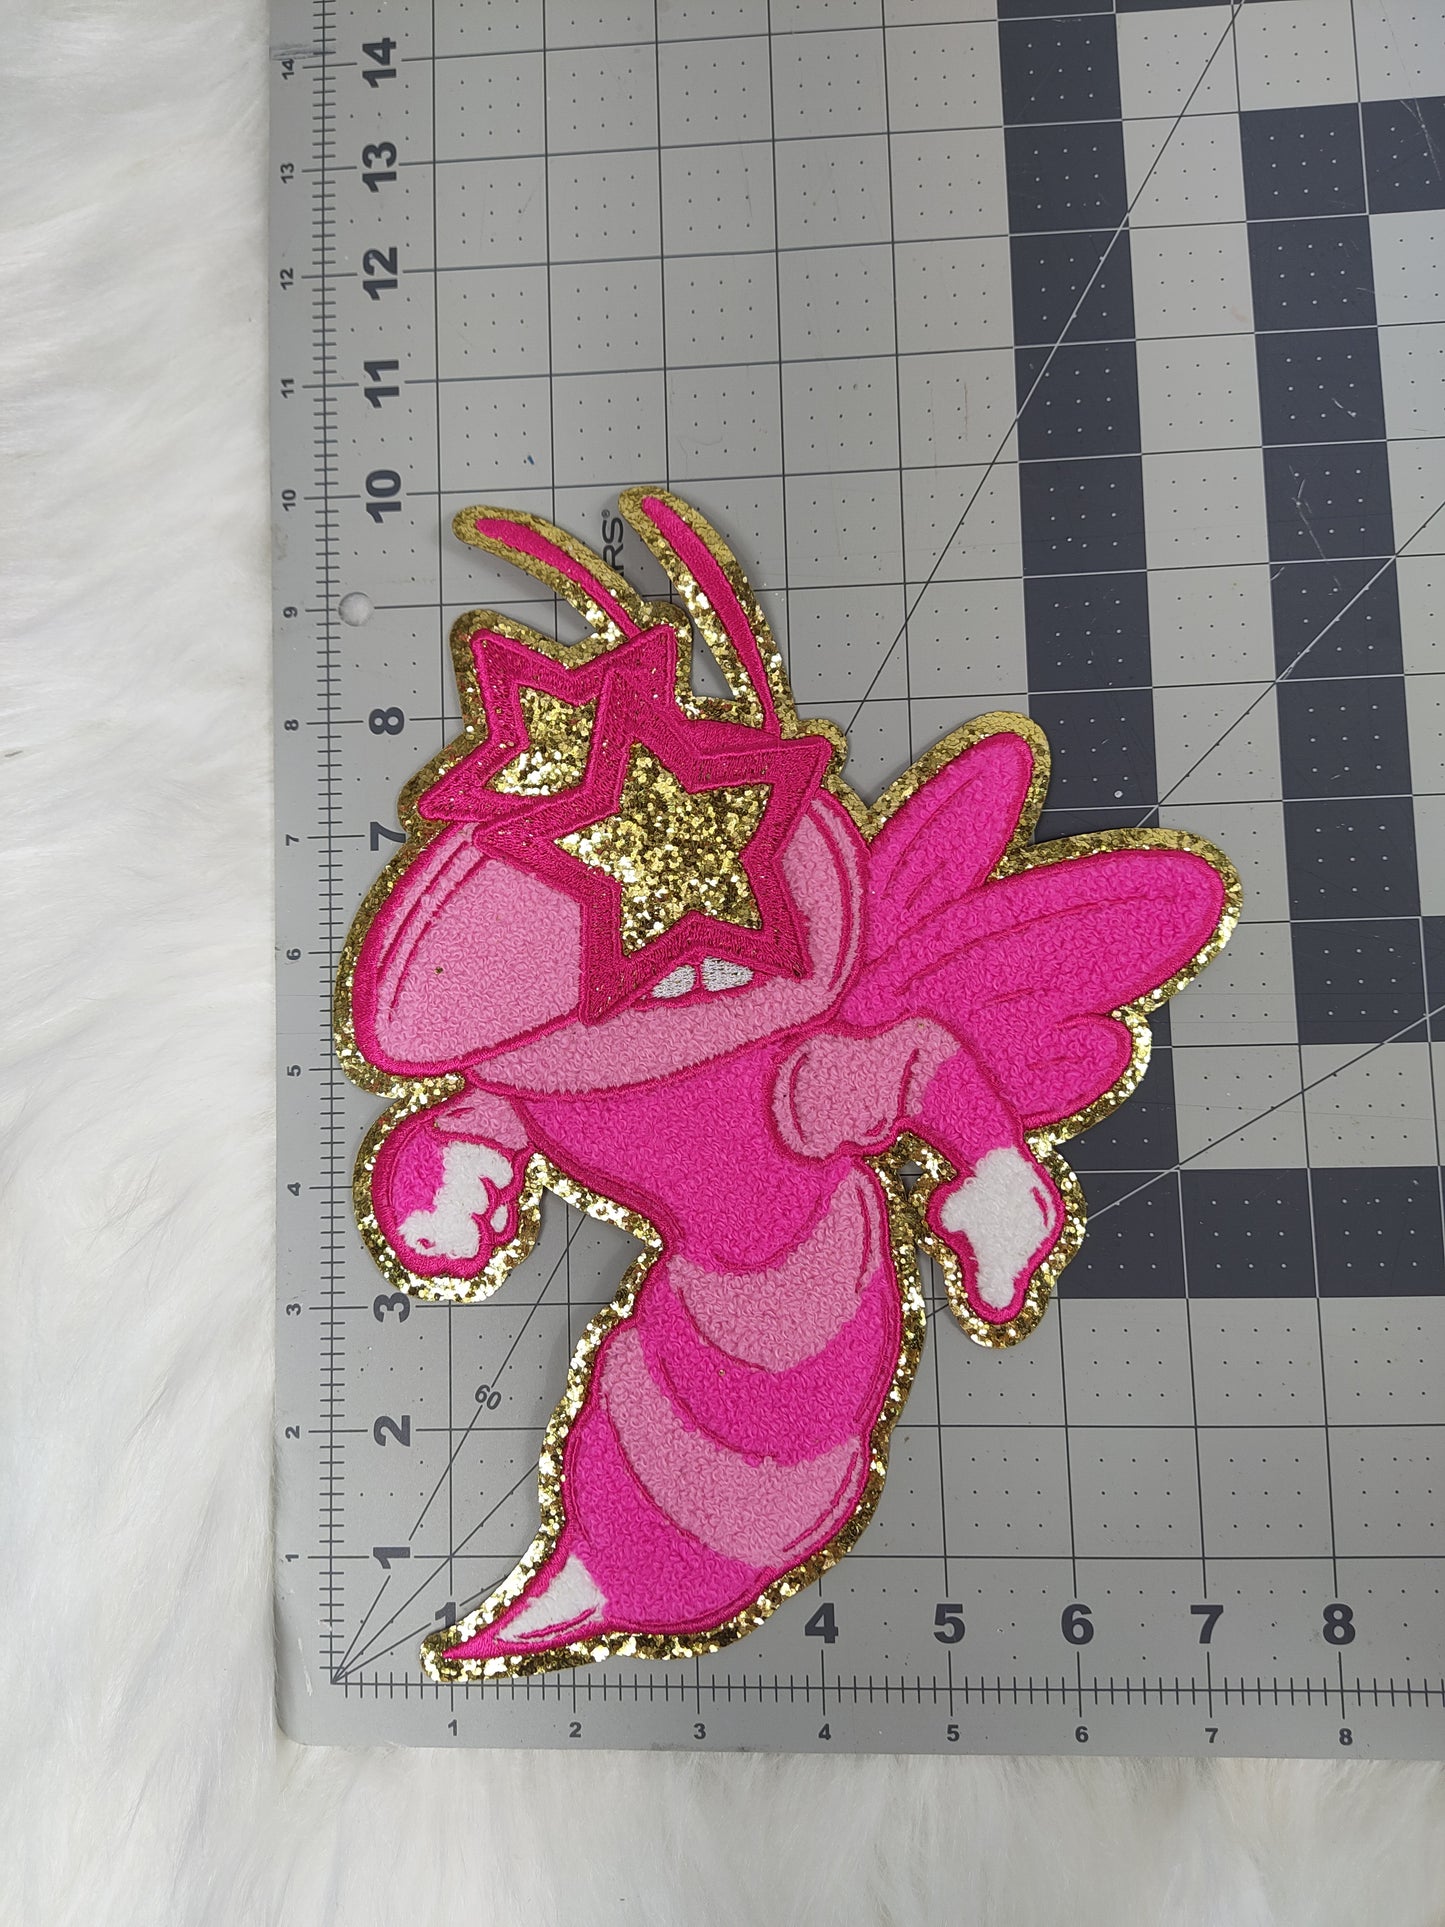 Hot Pink Hornet Bee Wasp Stinger Mascot with Star Eyes Large Chenille Iron-on Patch